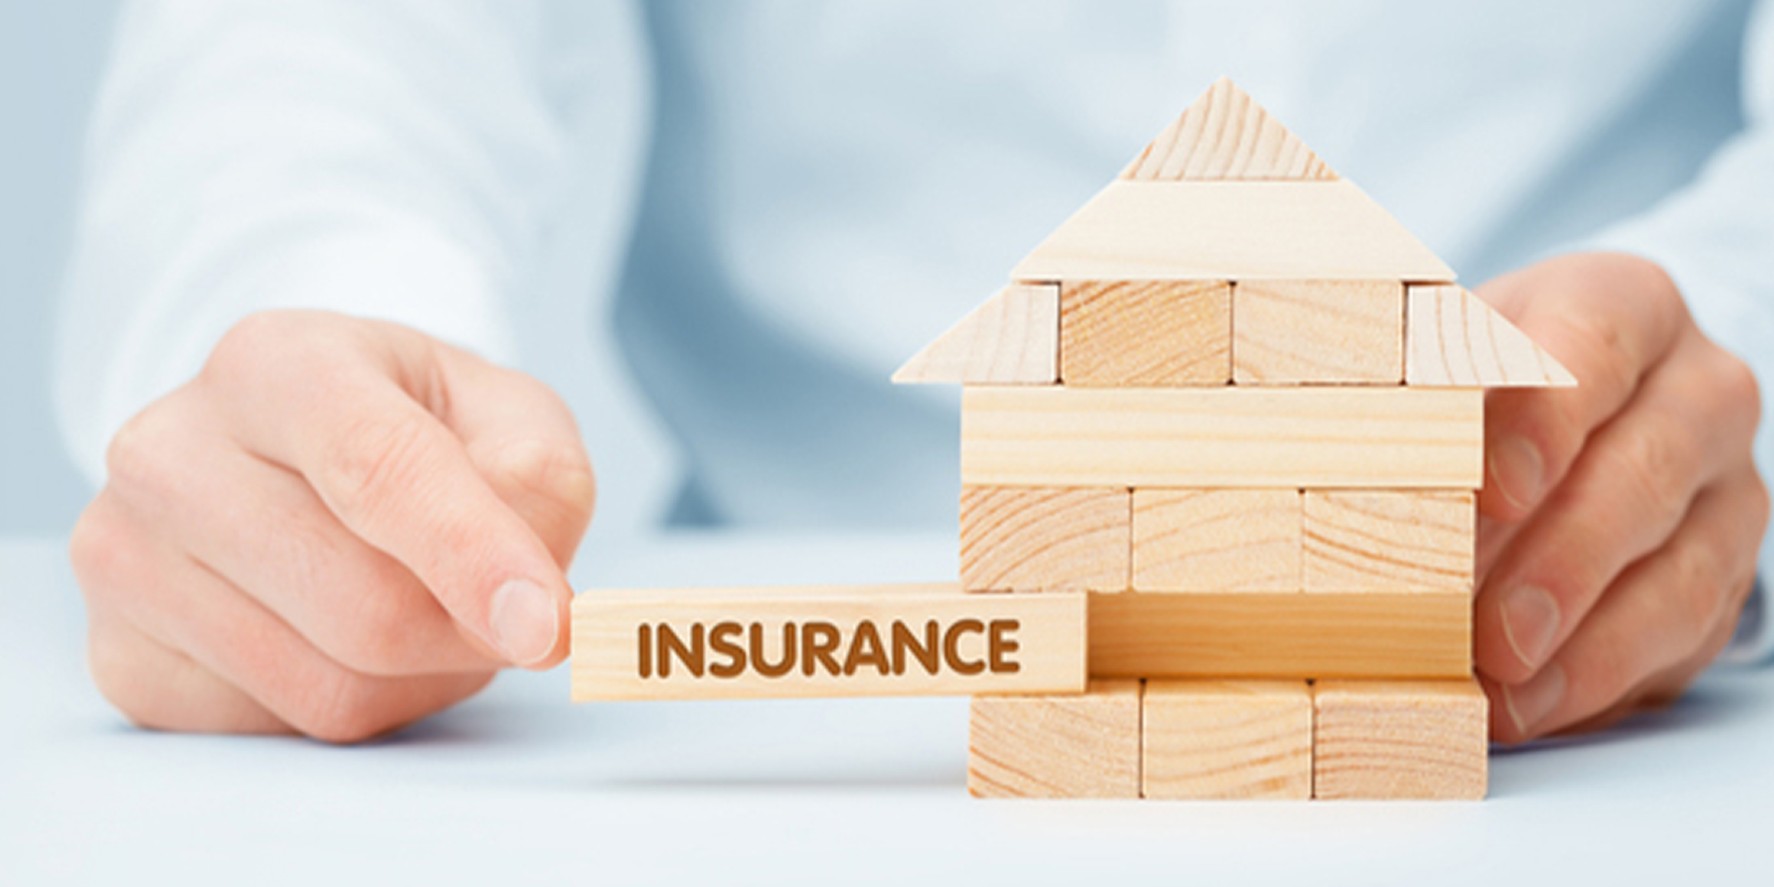 Consider These Points Before Buying Home Insurance